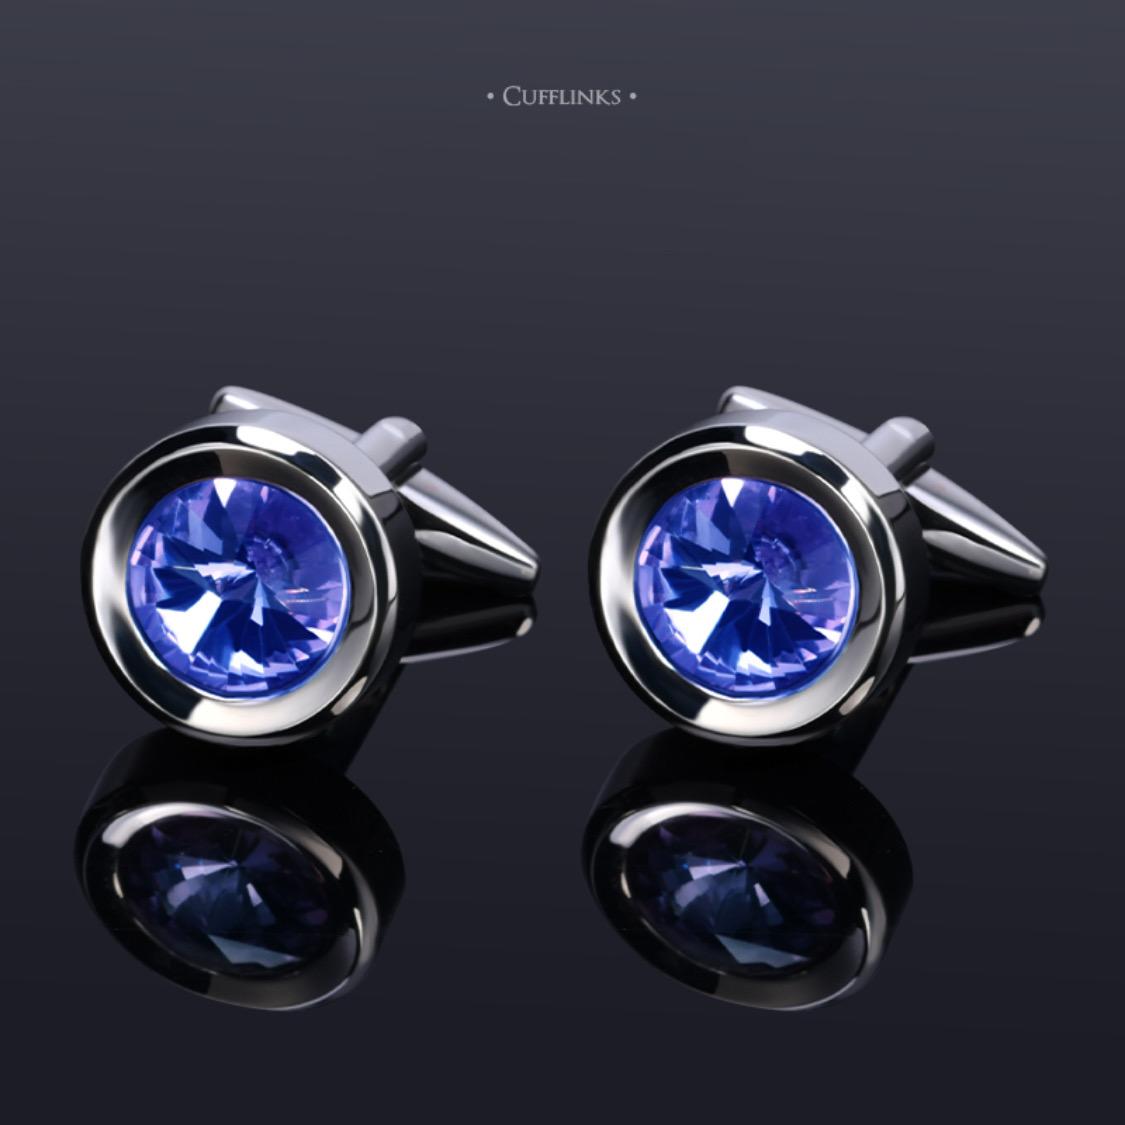 Buy Elegant Cufflinks for Men's Shirts - Perfect Accessories for Formal Occasions